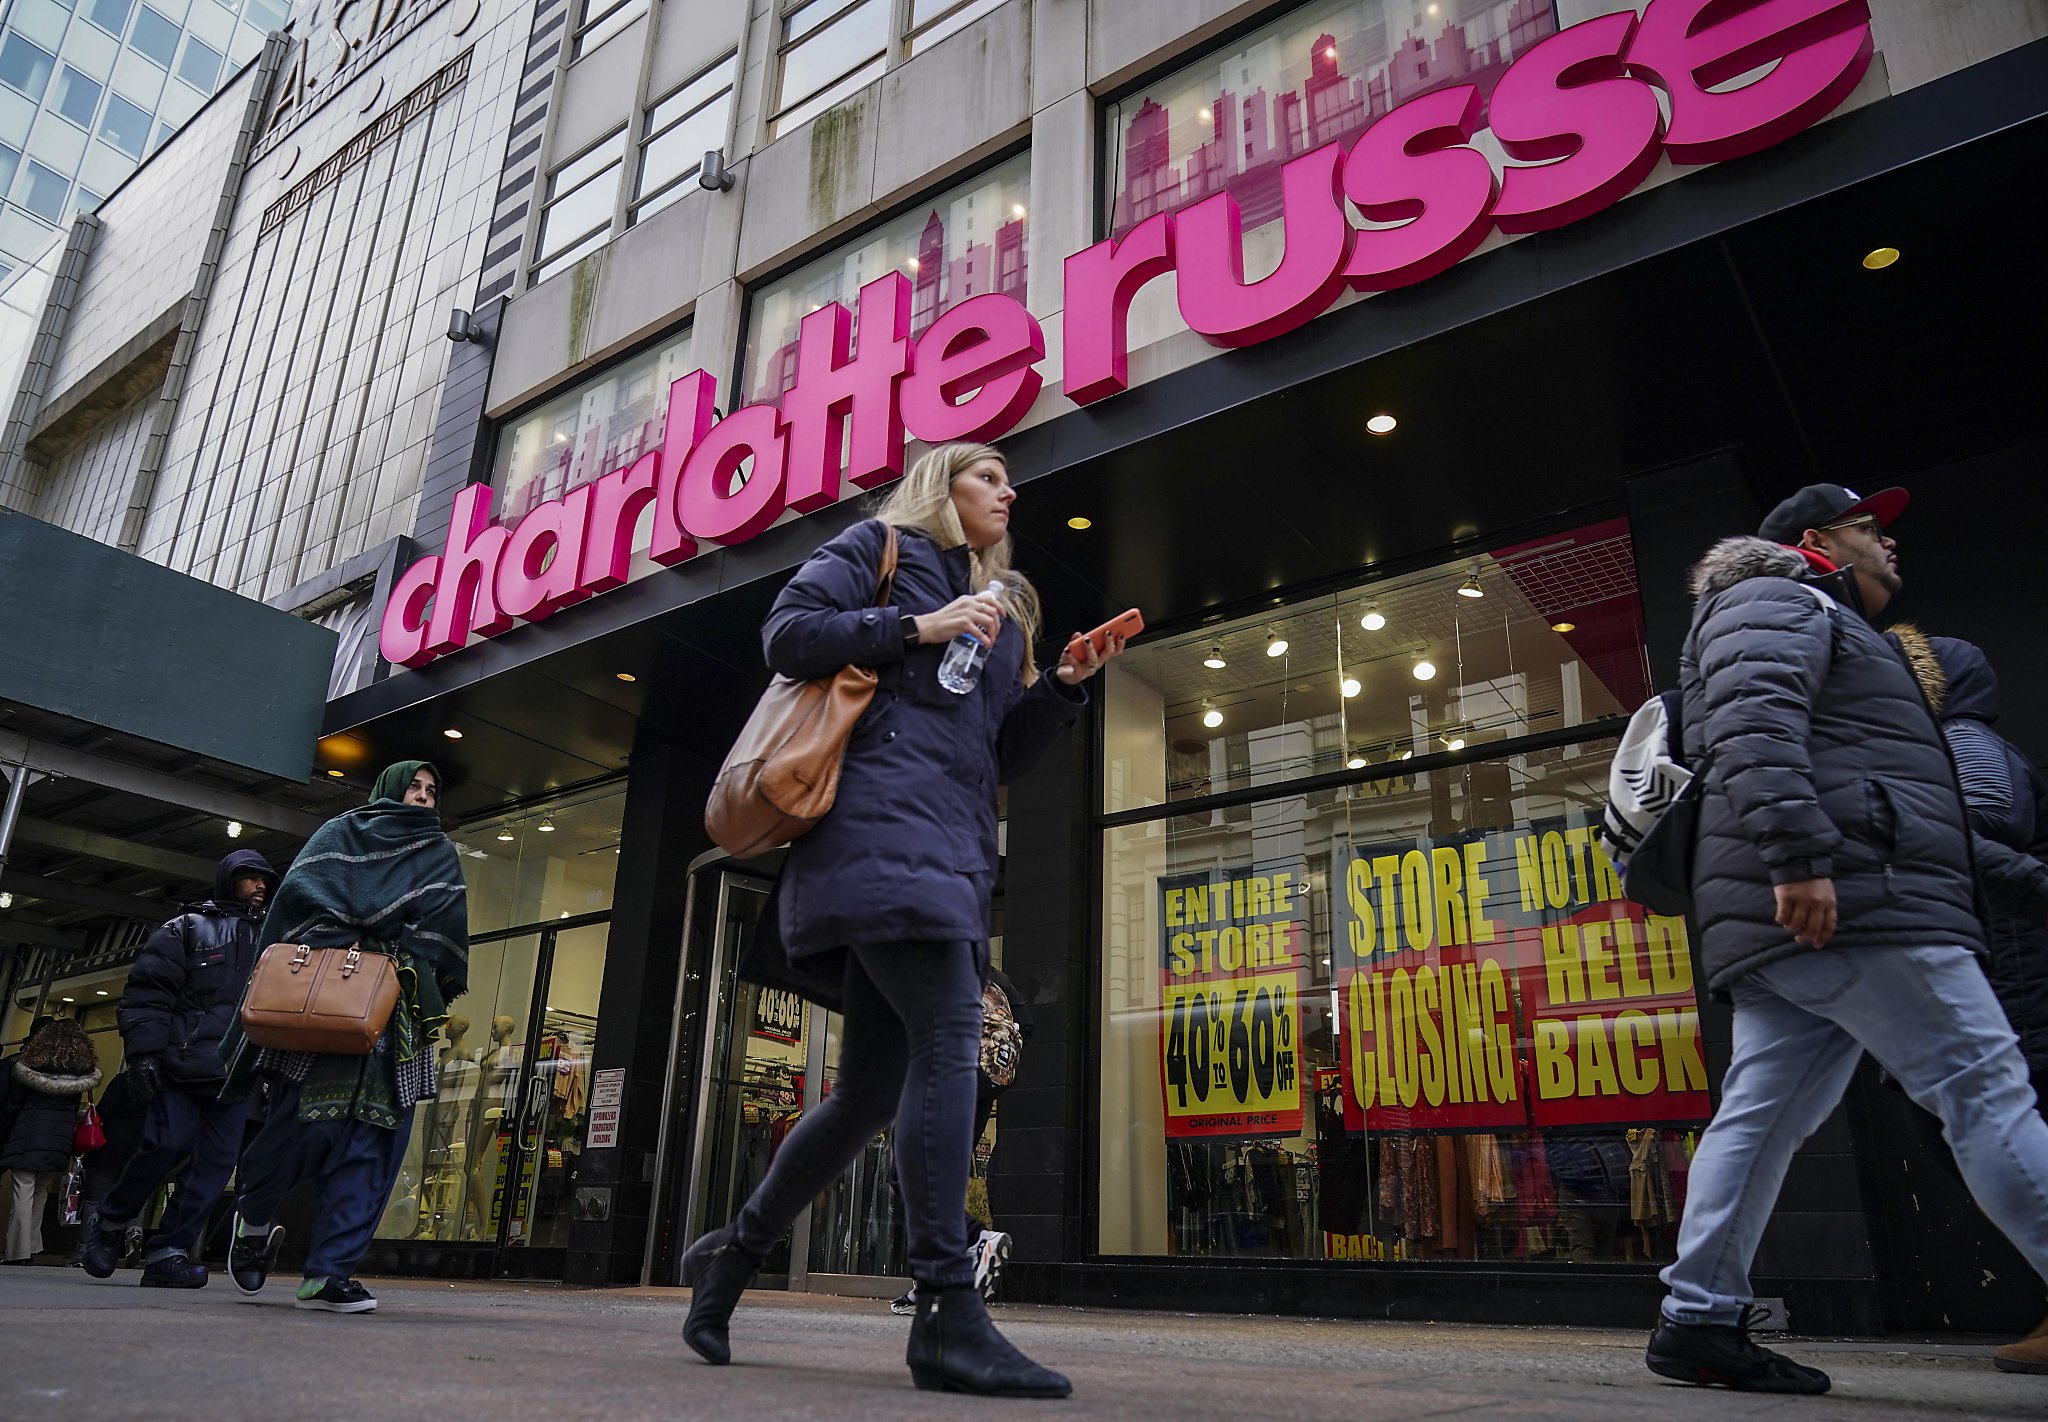 Charlotte Russe plans to open stores weeks after filing for bankruptcy.